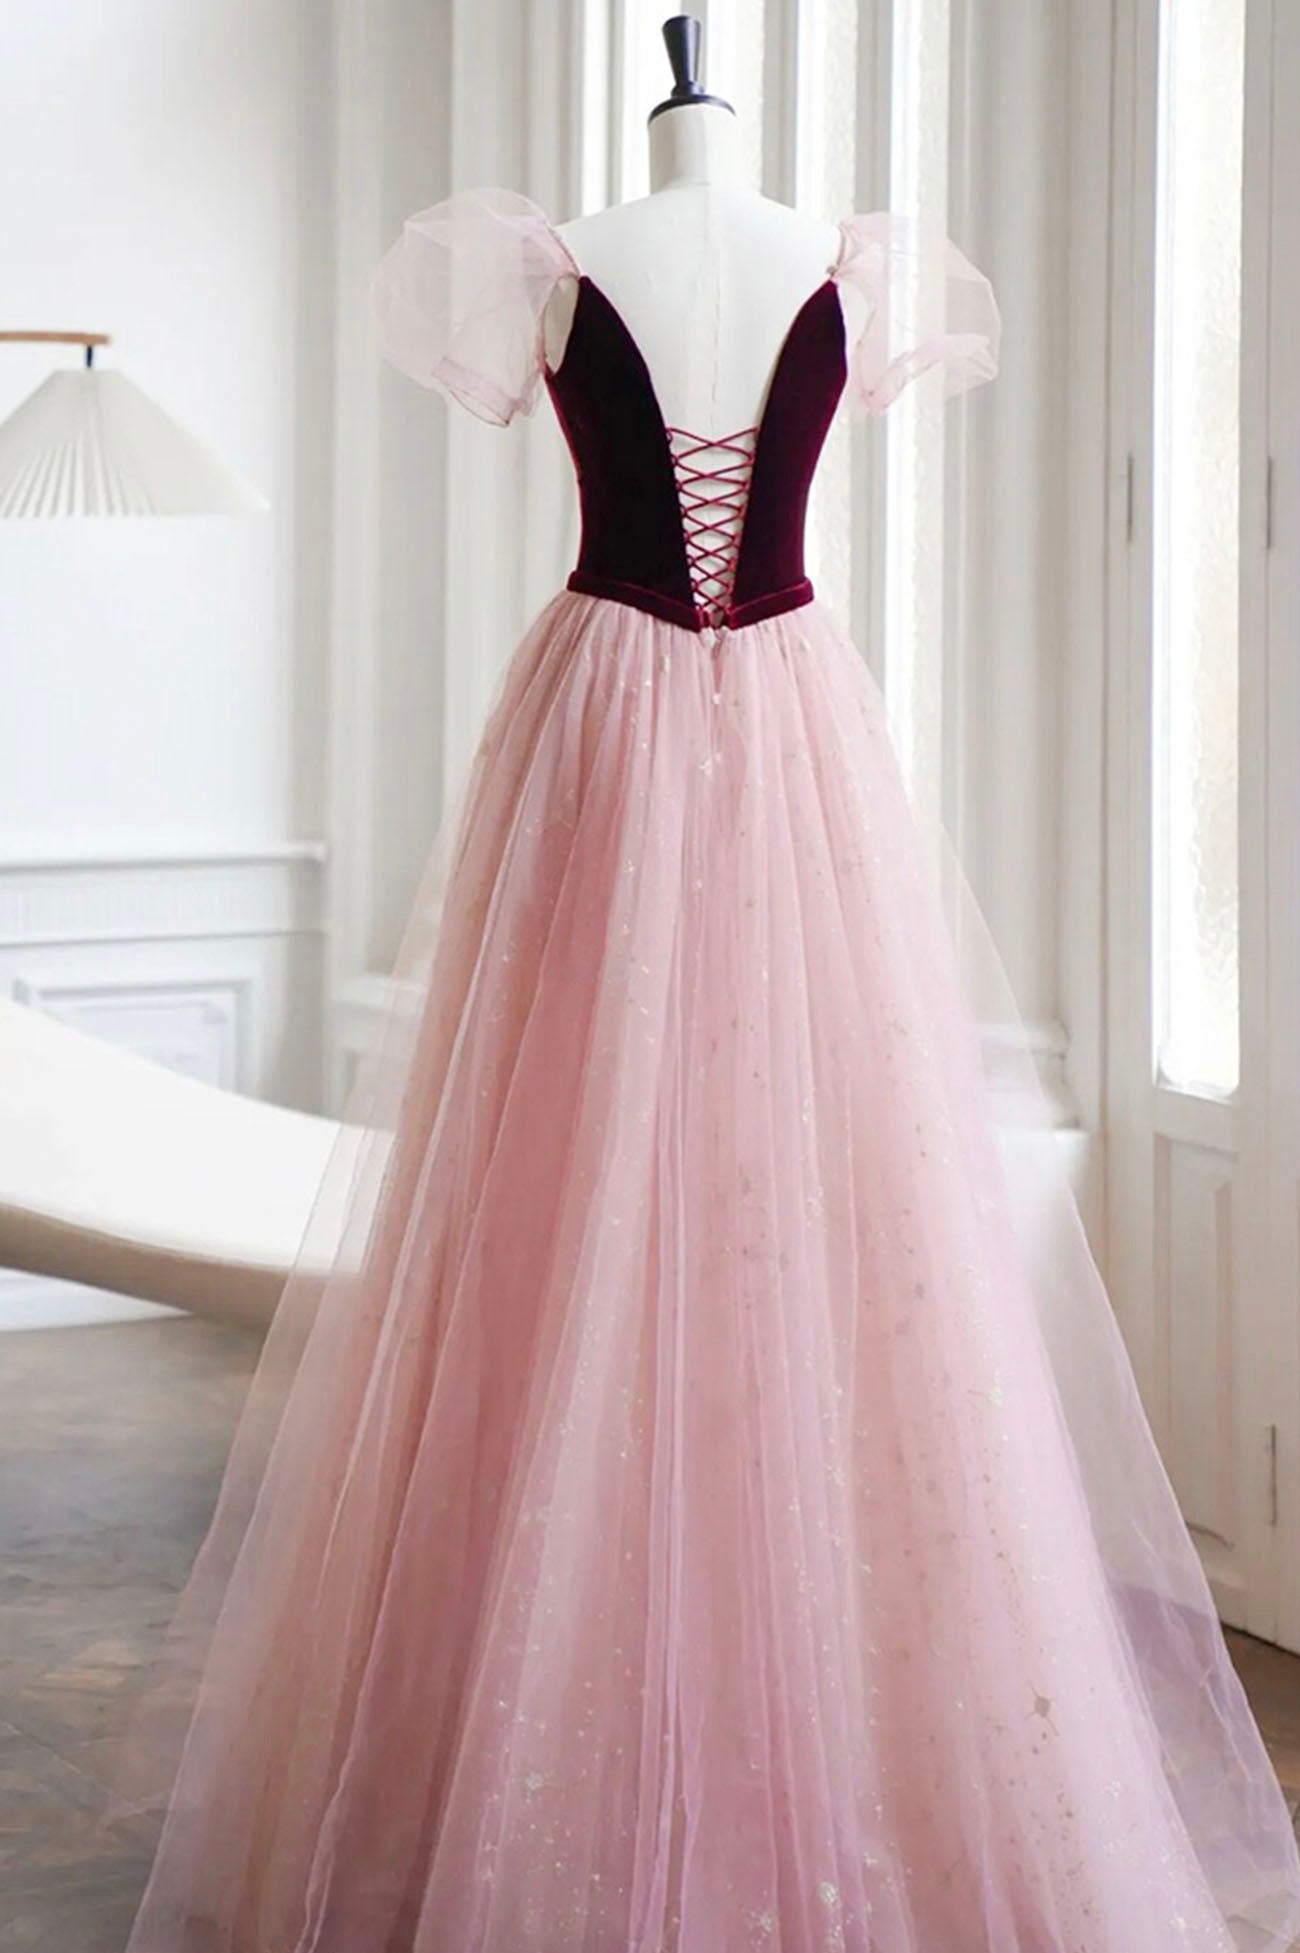 Party Dresses Teens, Burgundy Velvet and Pink Tulle Long A-Line Prom Dress, Lovely Party Dress